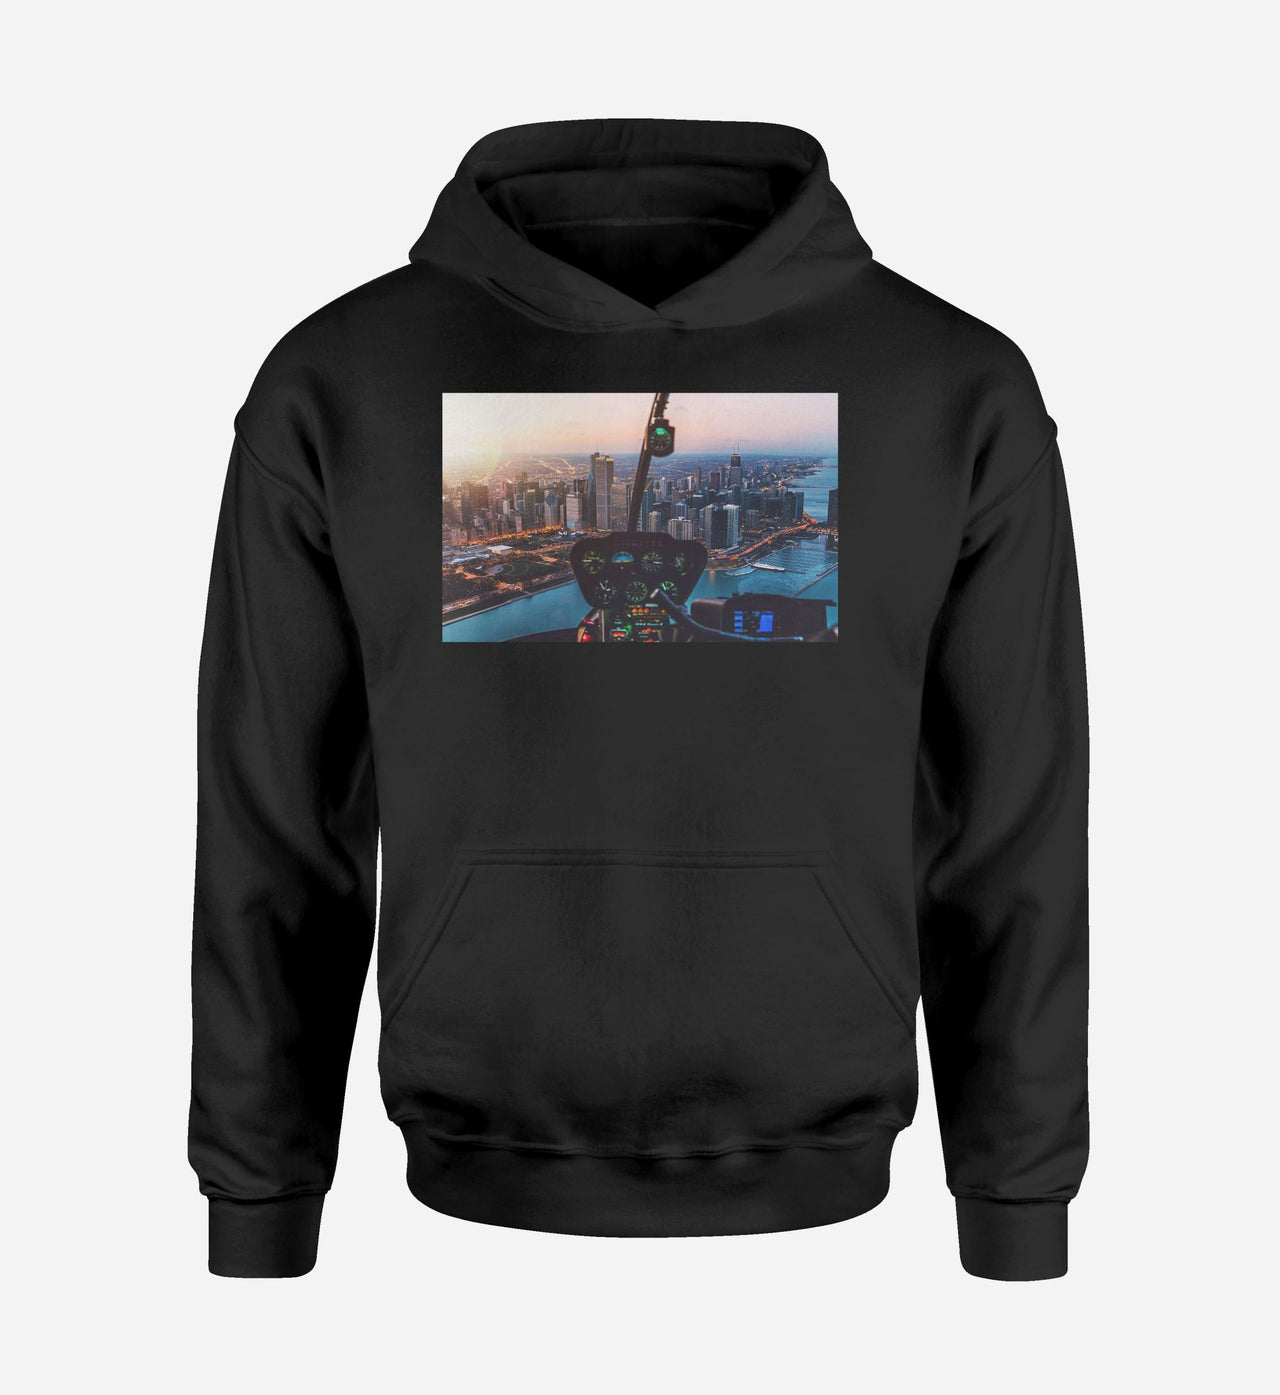 Amazing City View from Helicopter Cockpit Designed Hoodies